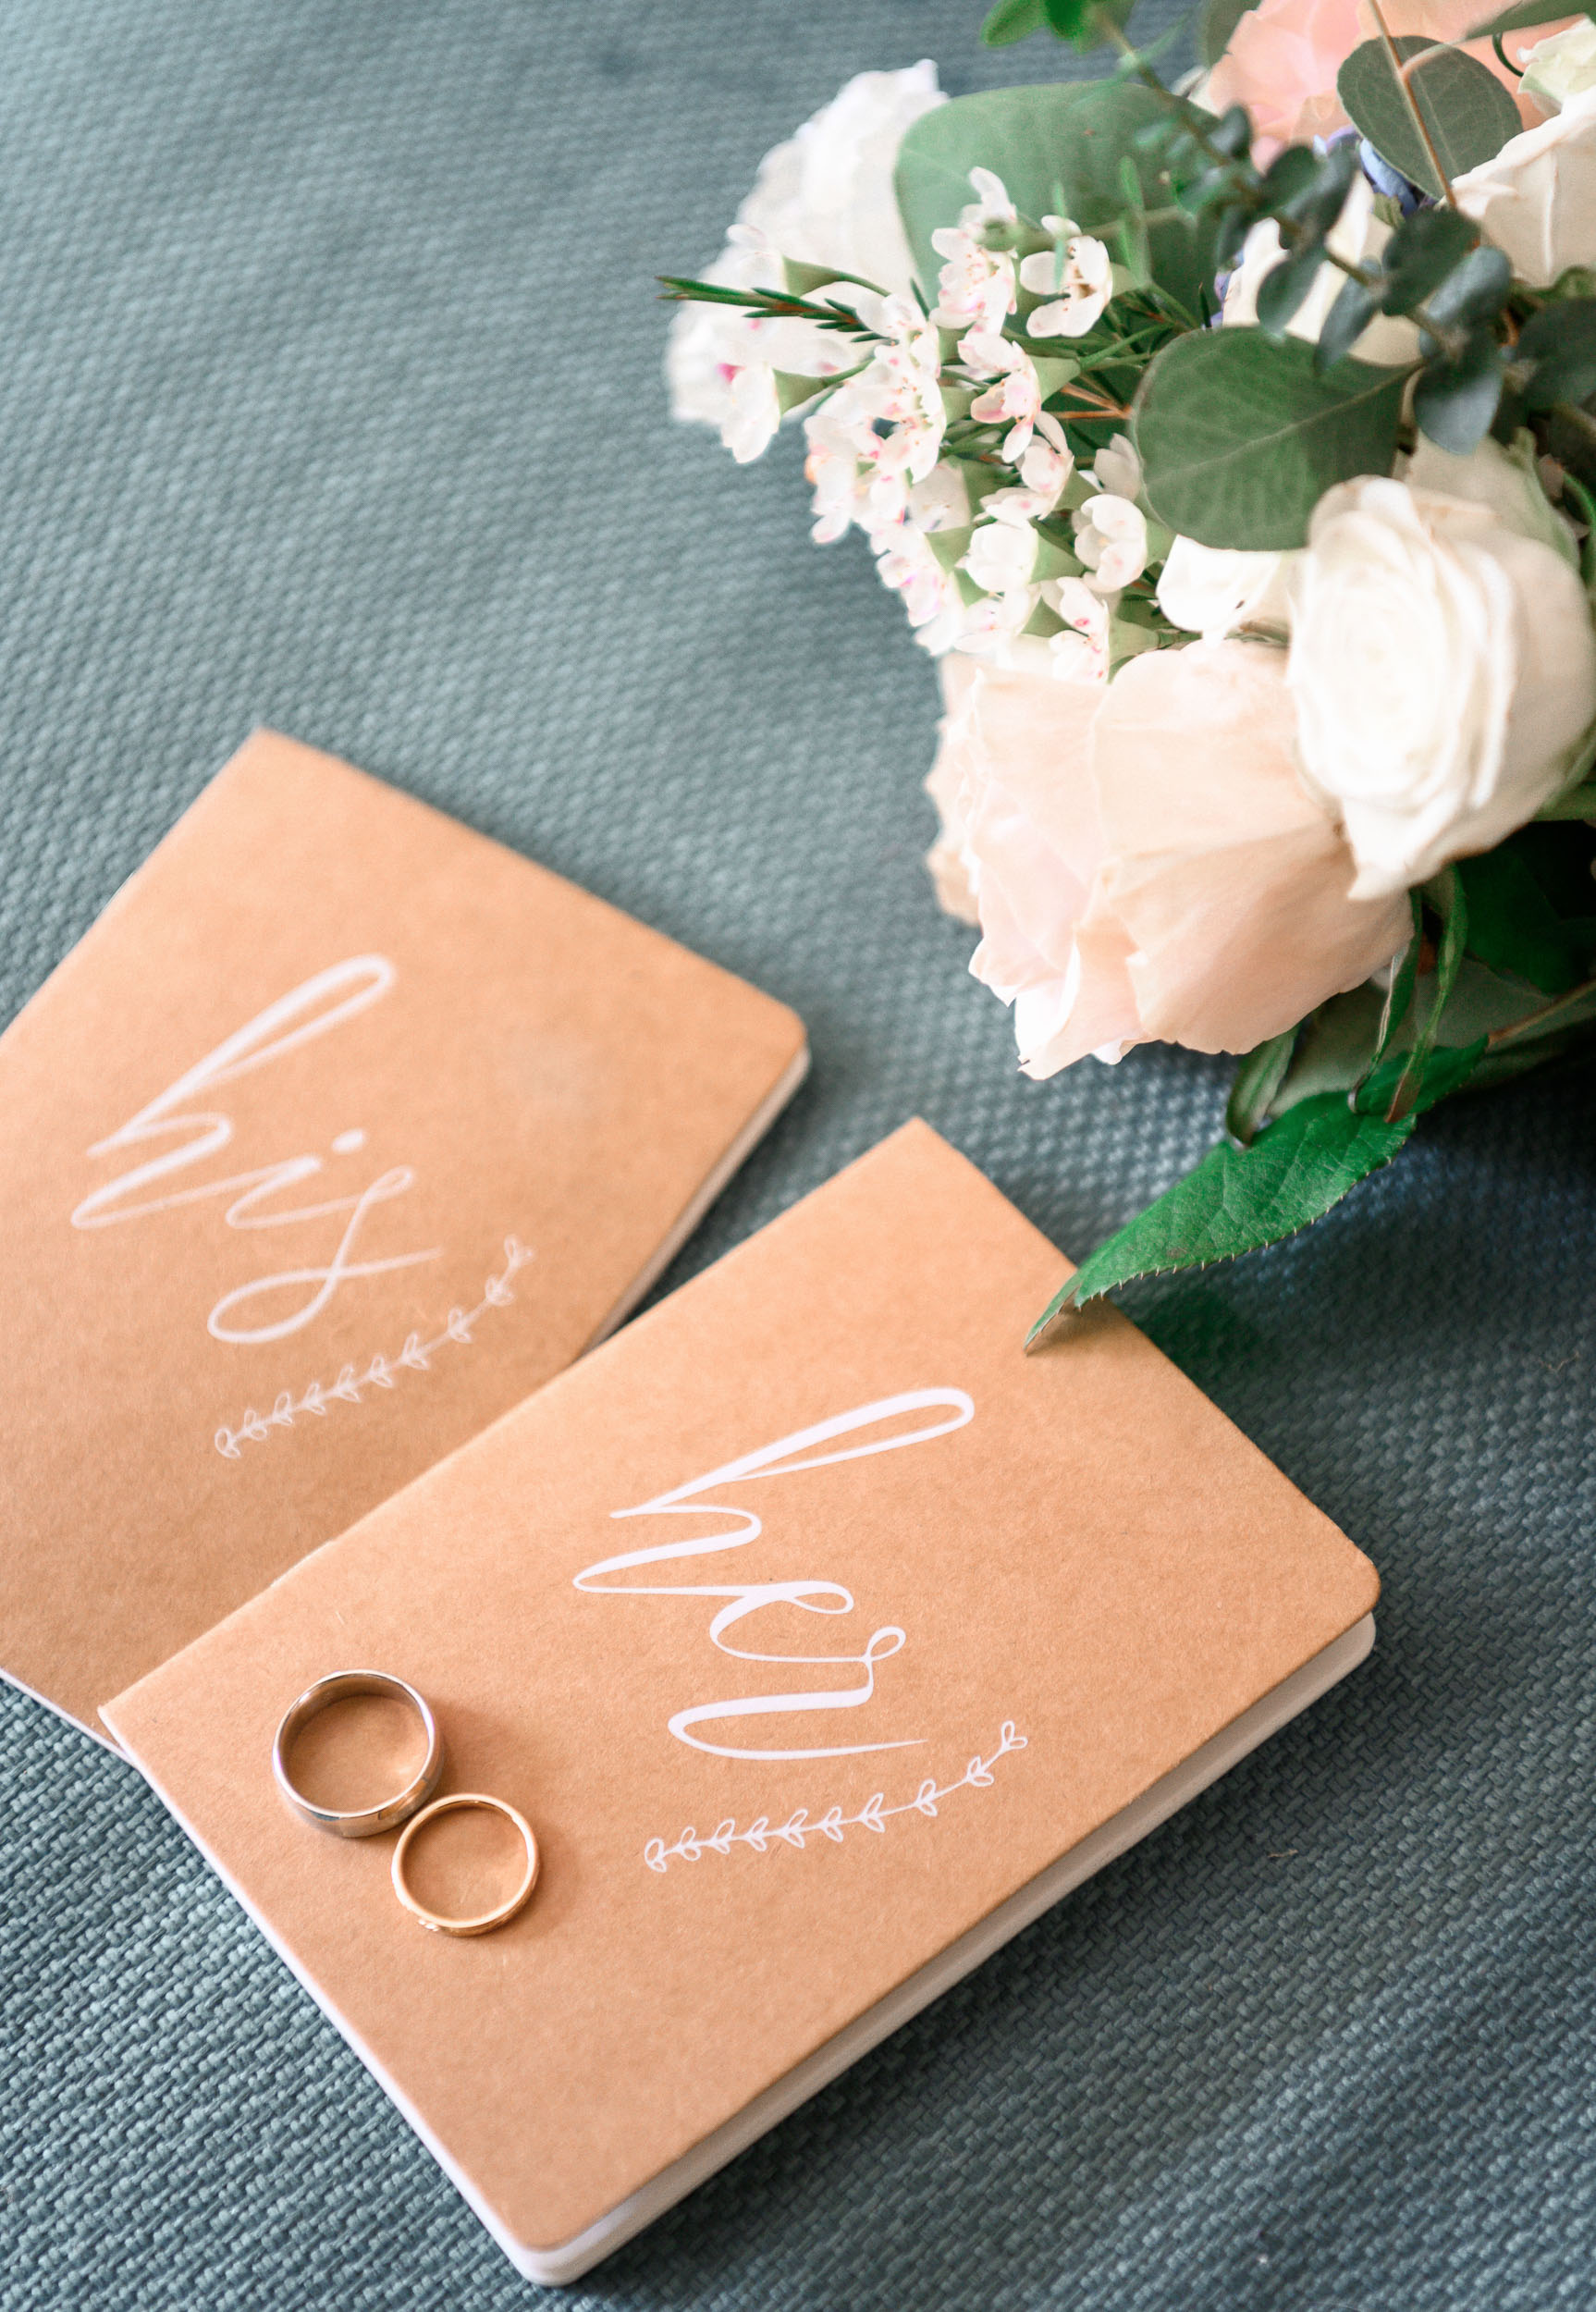 Two wedding rings and a notebook on a table.